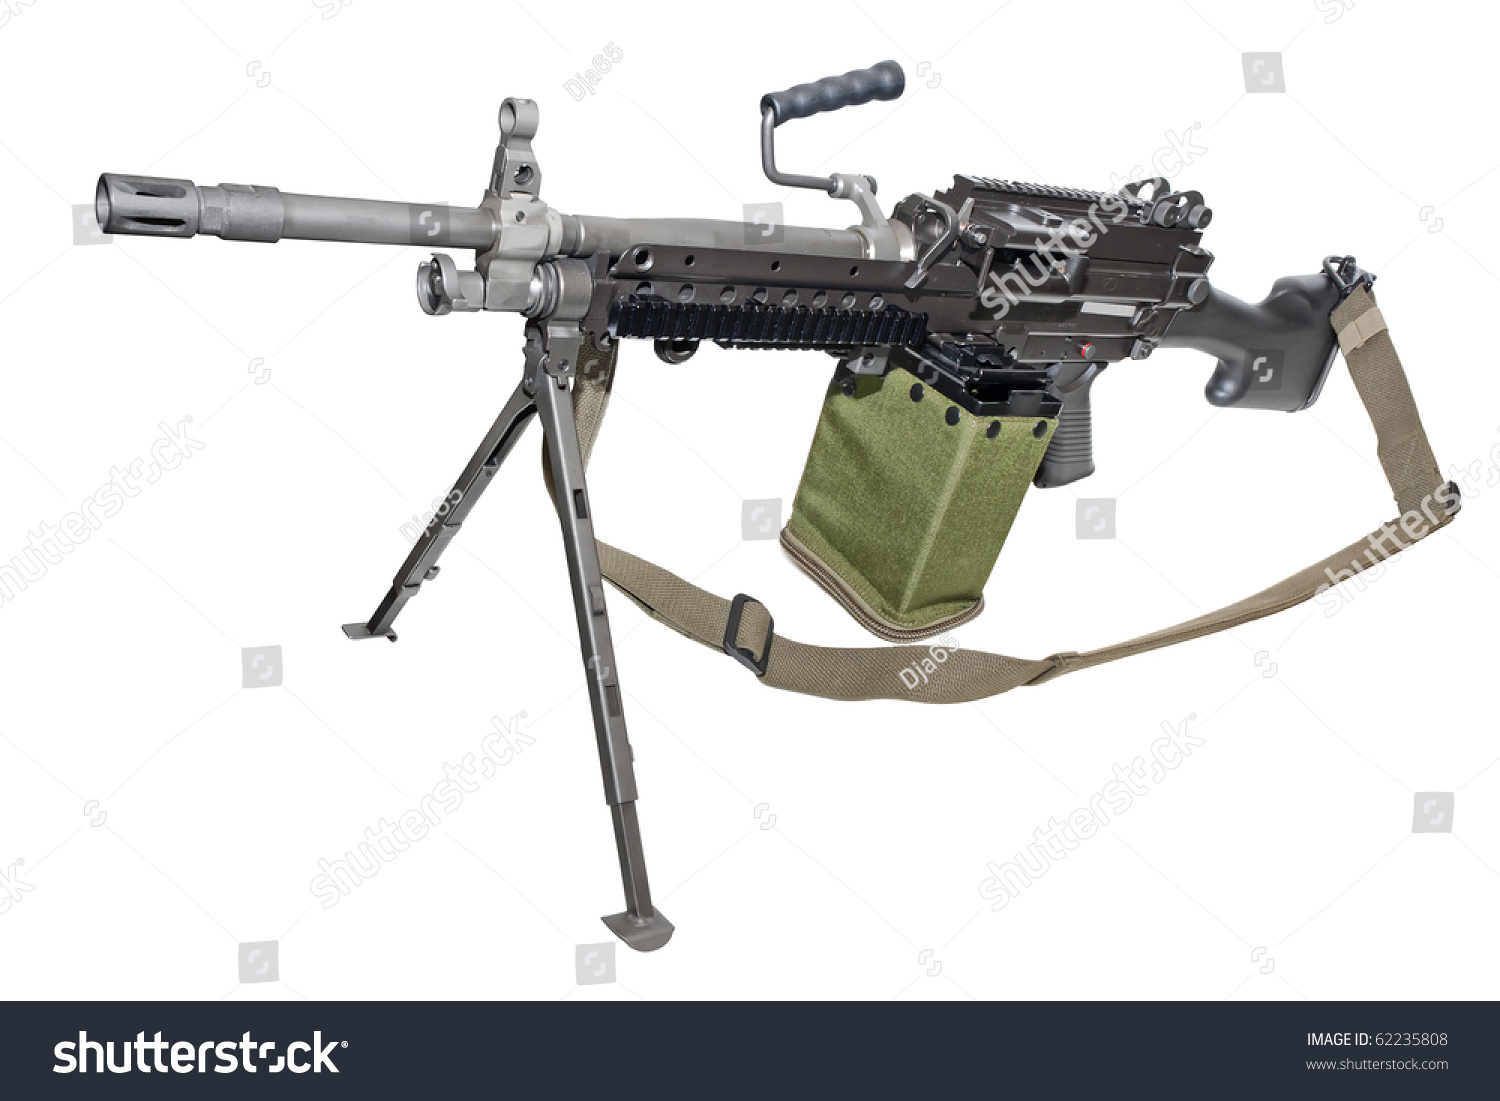 New Machine Gun On The Tripod Isolated On White Clipping Path Included